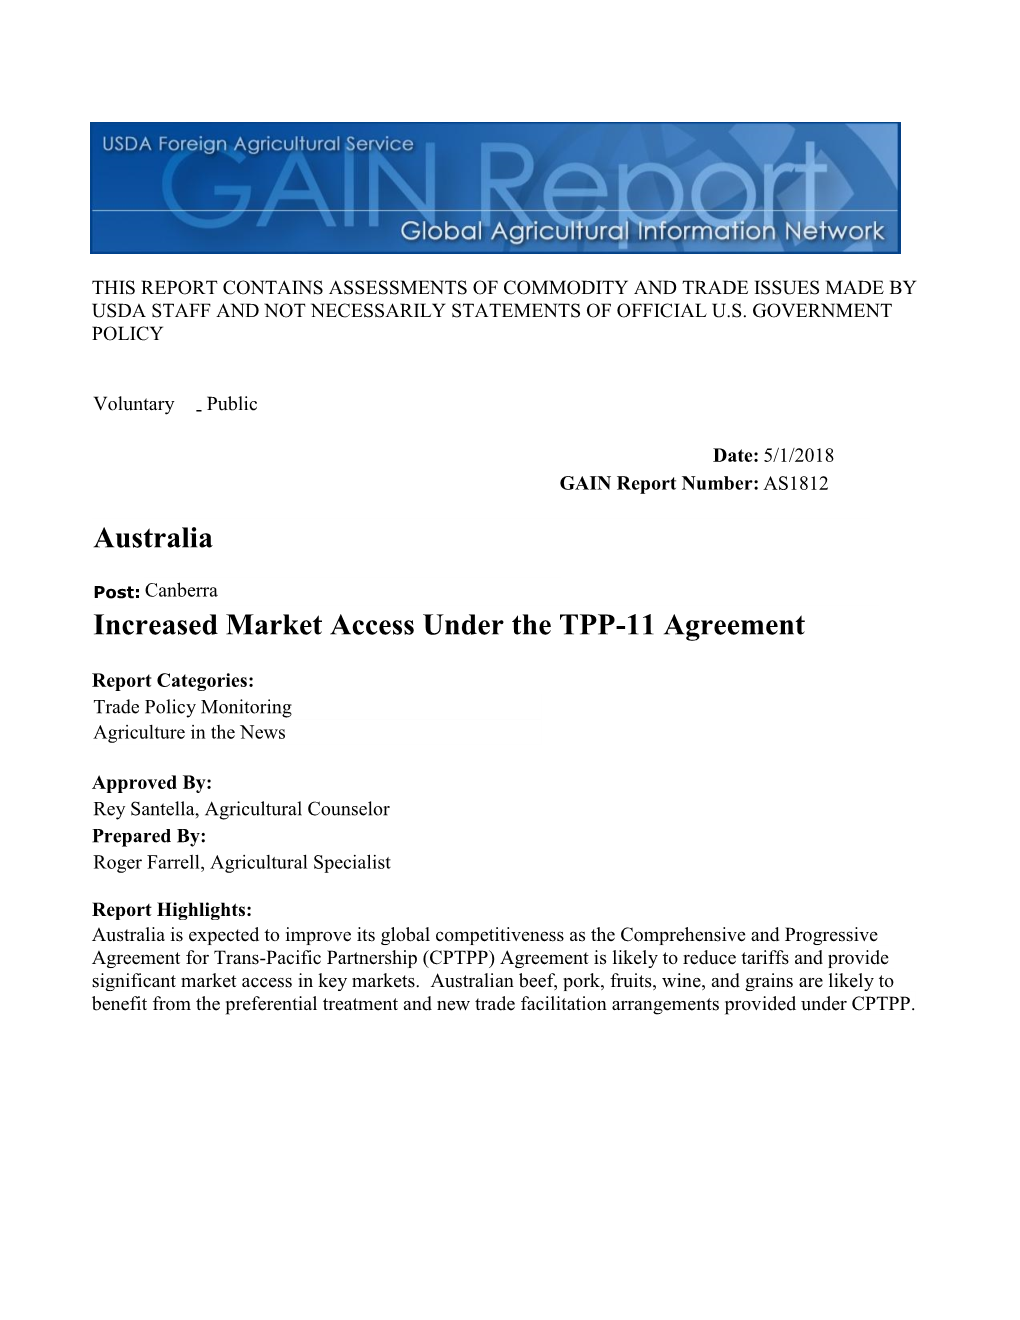 Australia: Increased Market Access Under the TPP-11 Agreement